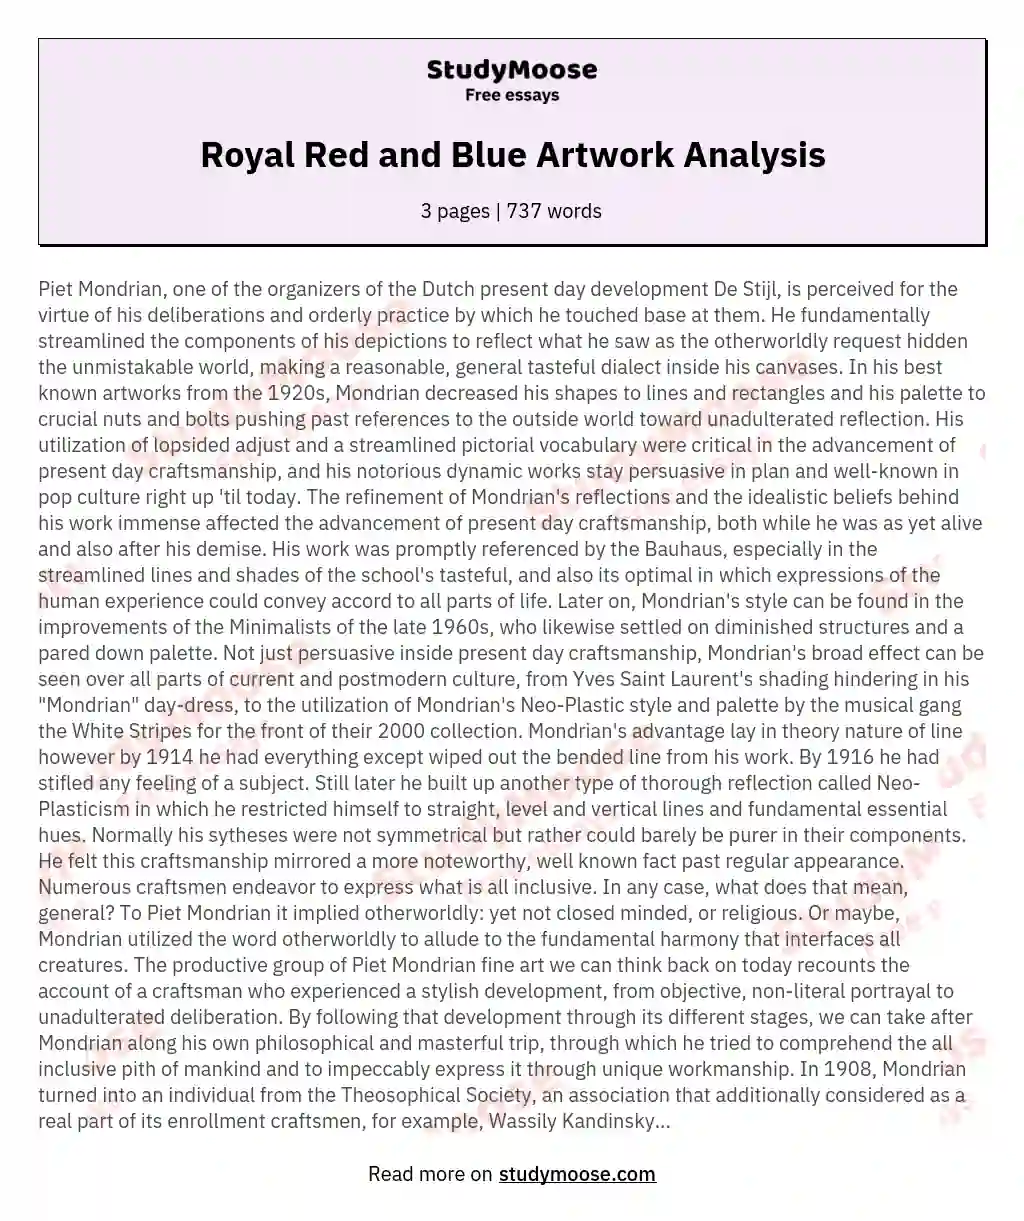 Royal Red and Blue Artwork Analysis essay